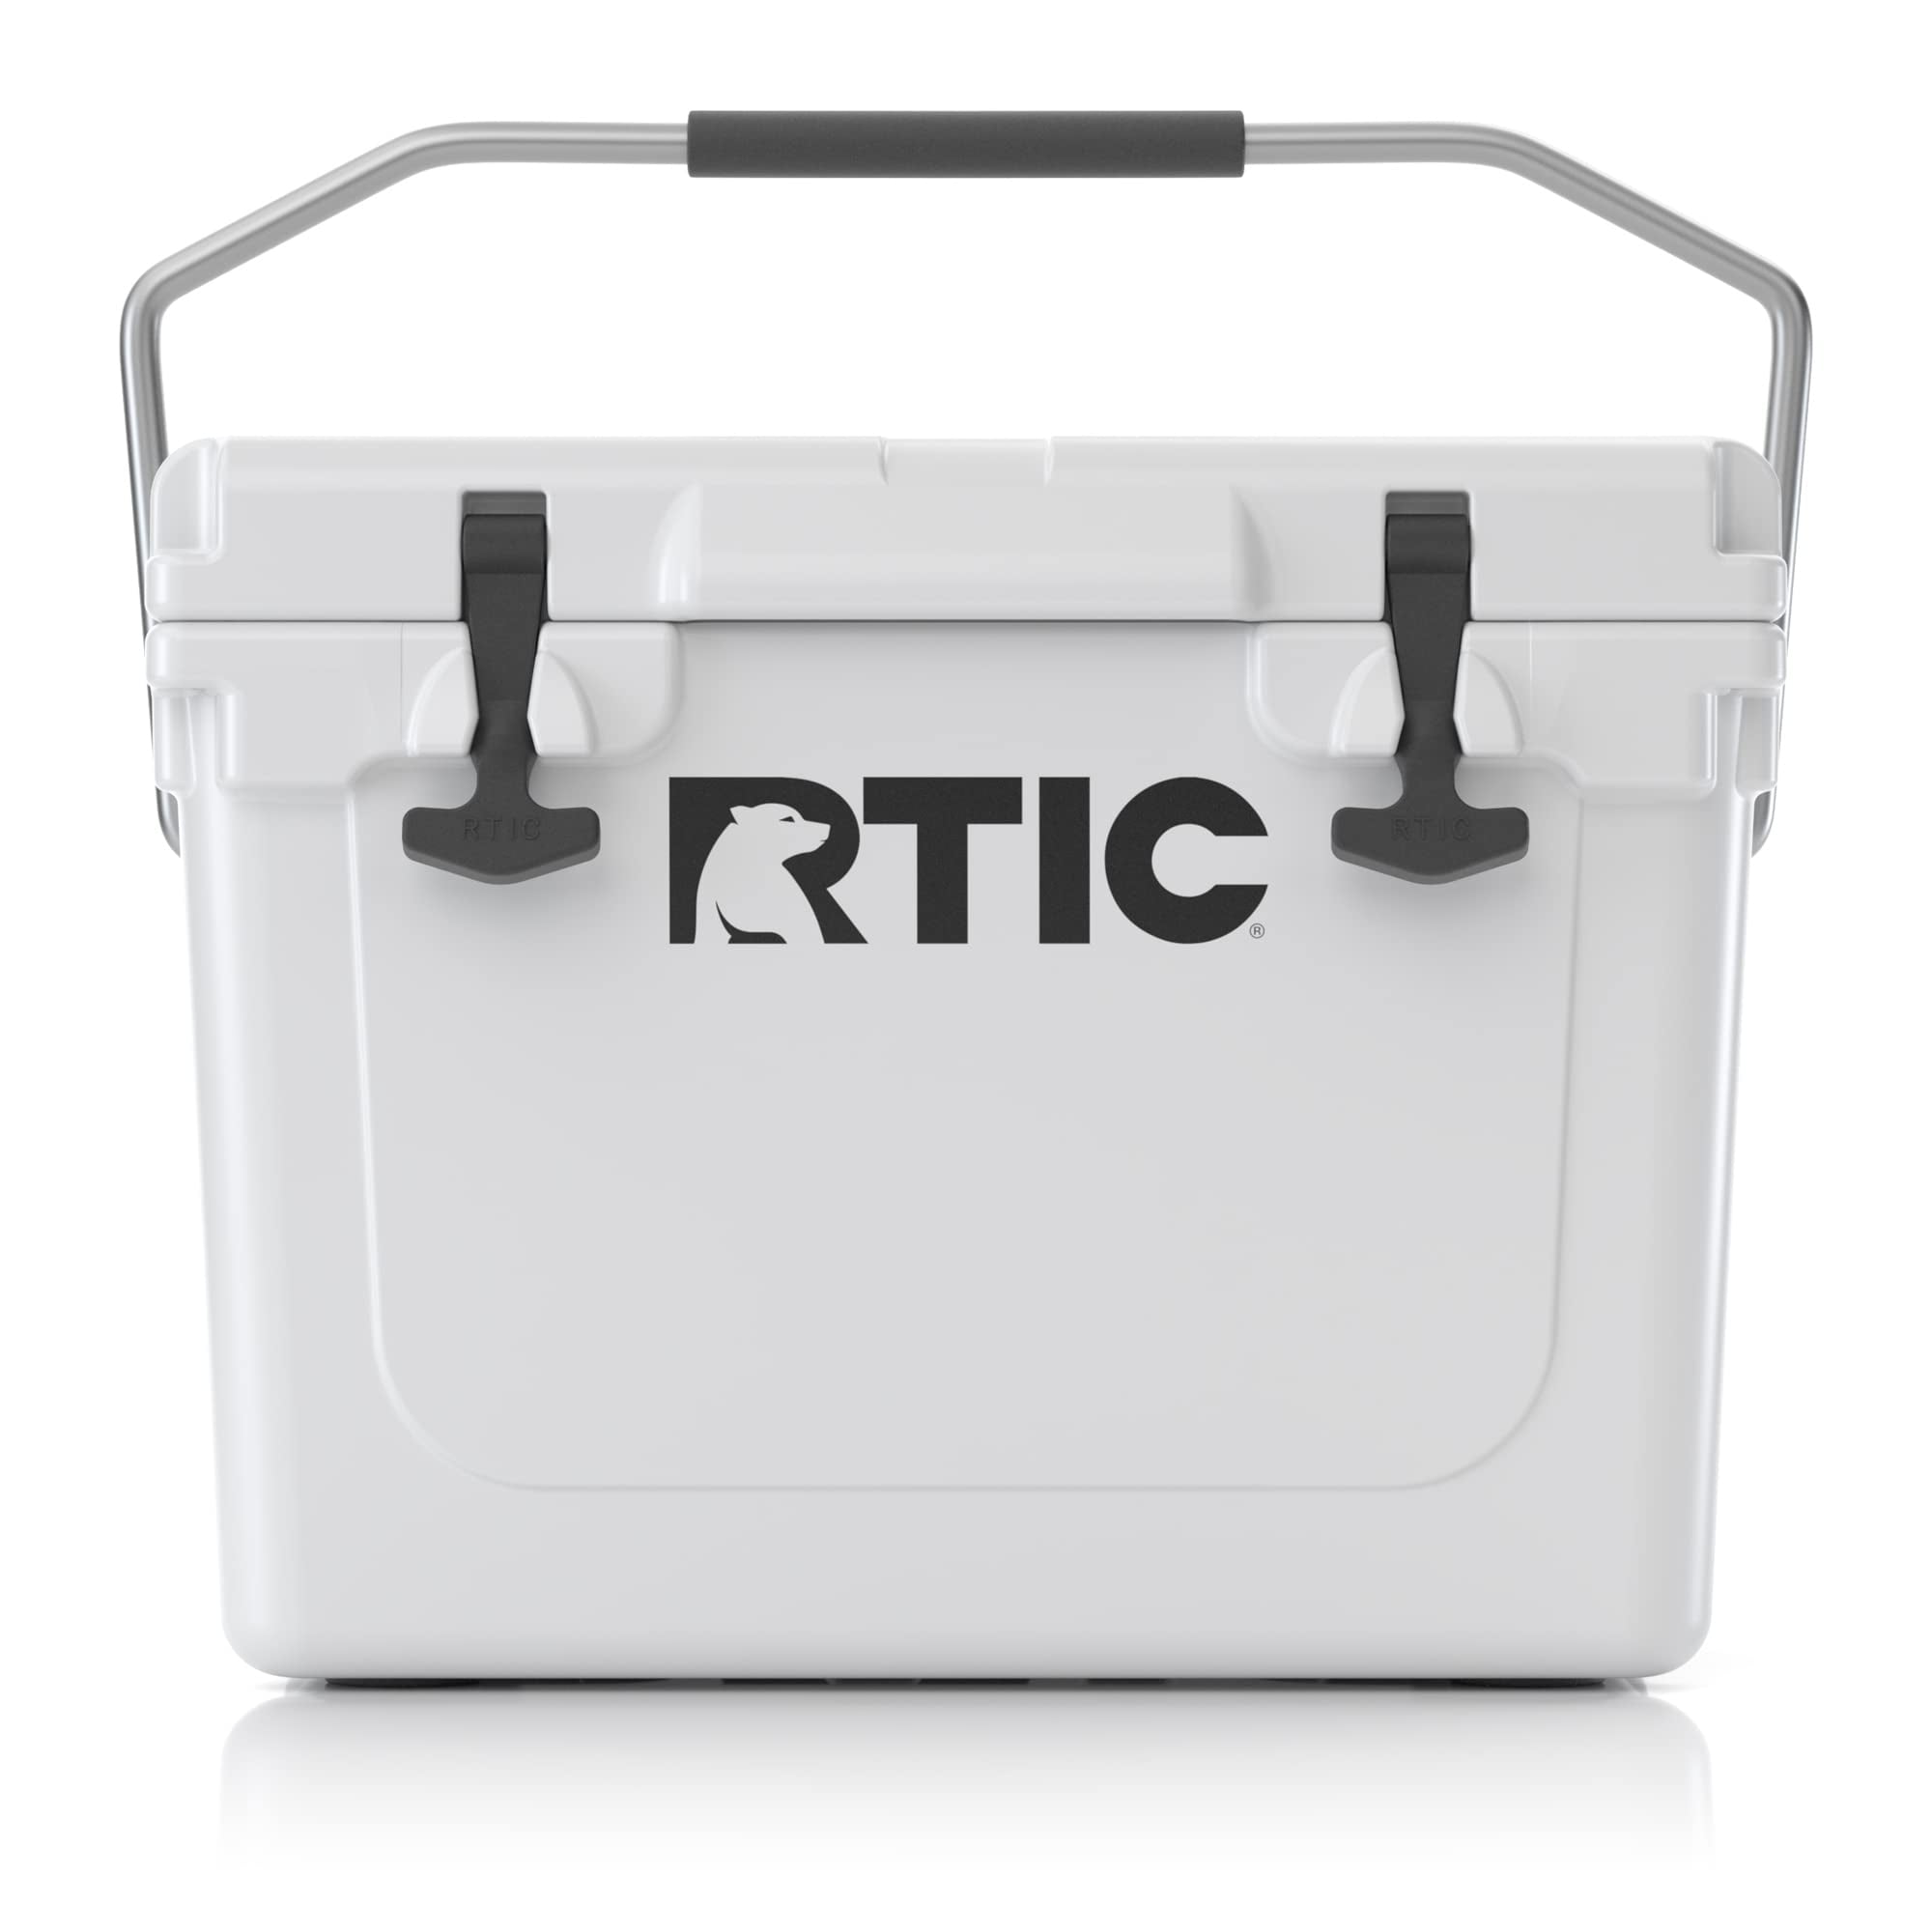 RTIC Hard Cooler 45 qt, Ice Chest with Heavy Duty Rubber Latches, 3 Inch  Insulated Walls Keeping Ice Cold for Days, Great for The Beach, Boat,  Fishing, Barbecue or Camping, White 